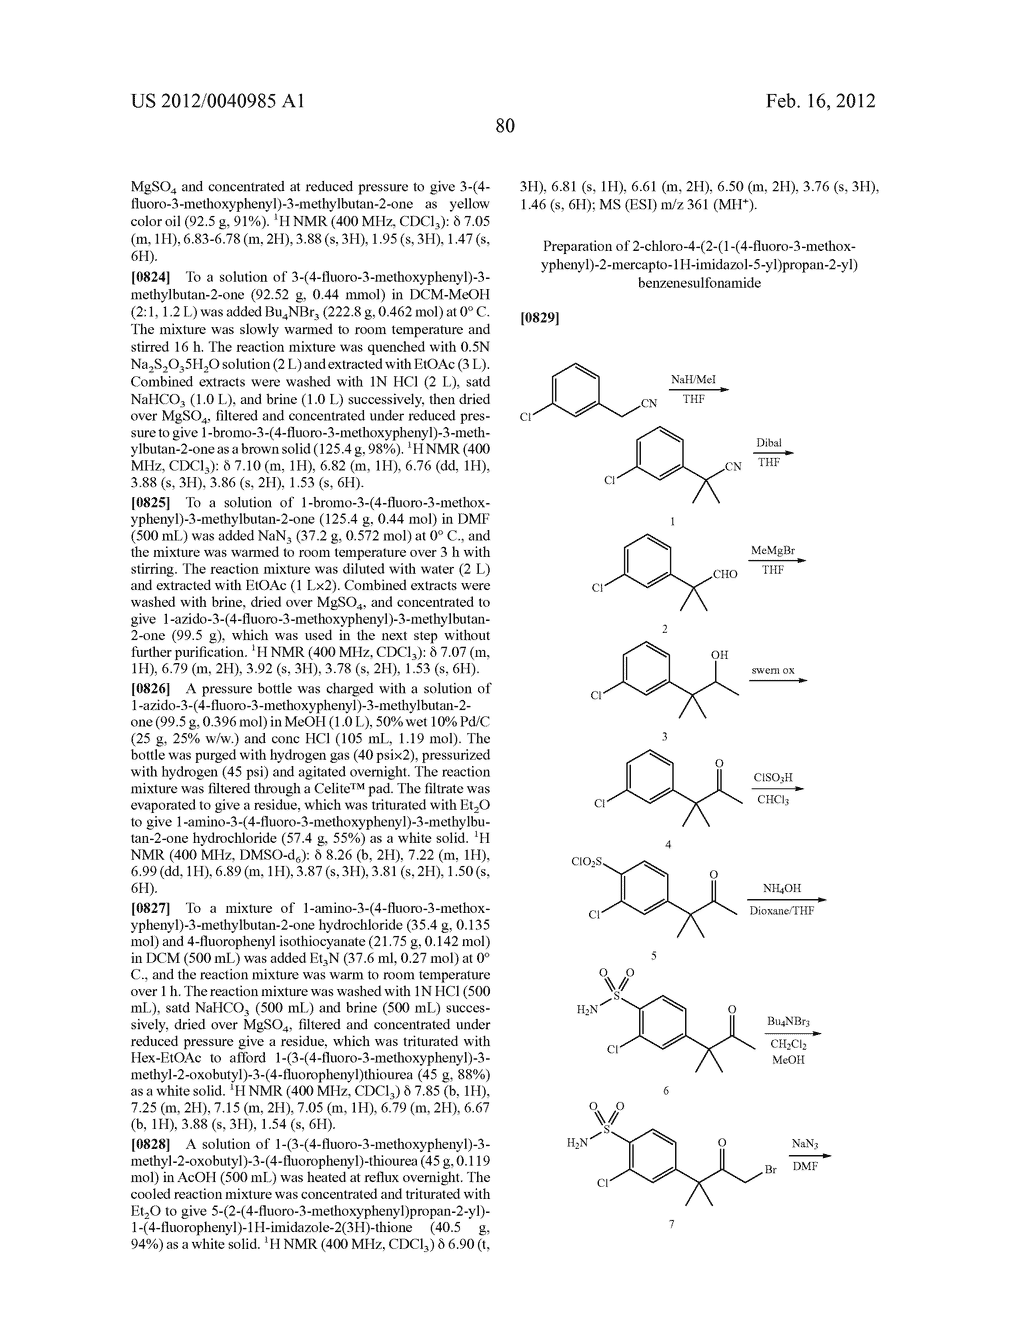 TRIAZOLE AND IMIDAZOLE DERIVATIVES FOR USE AS TGR5 AGONISTS IN THE     TREATMENT OF DIABETES AND OBESITY - diagram, schematic, and image 83